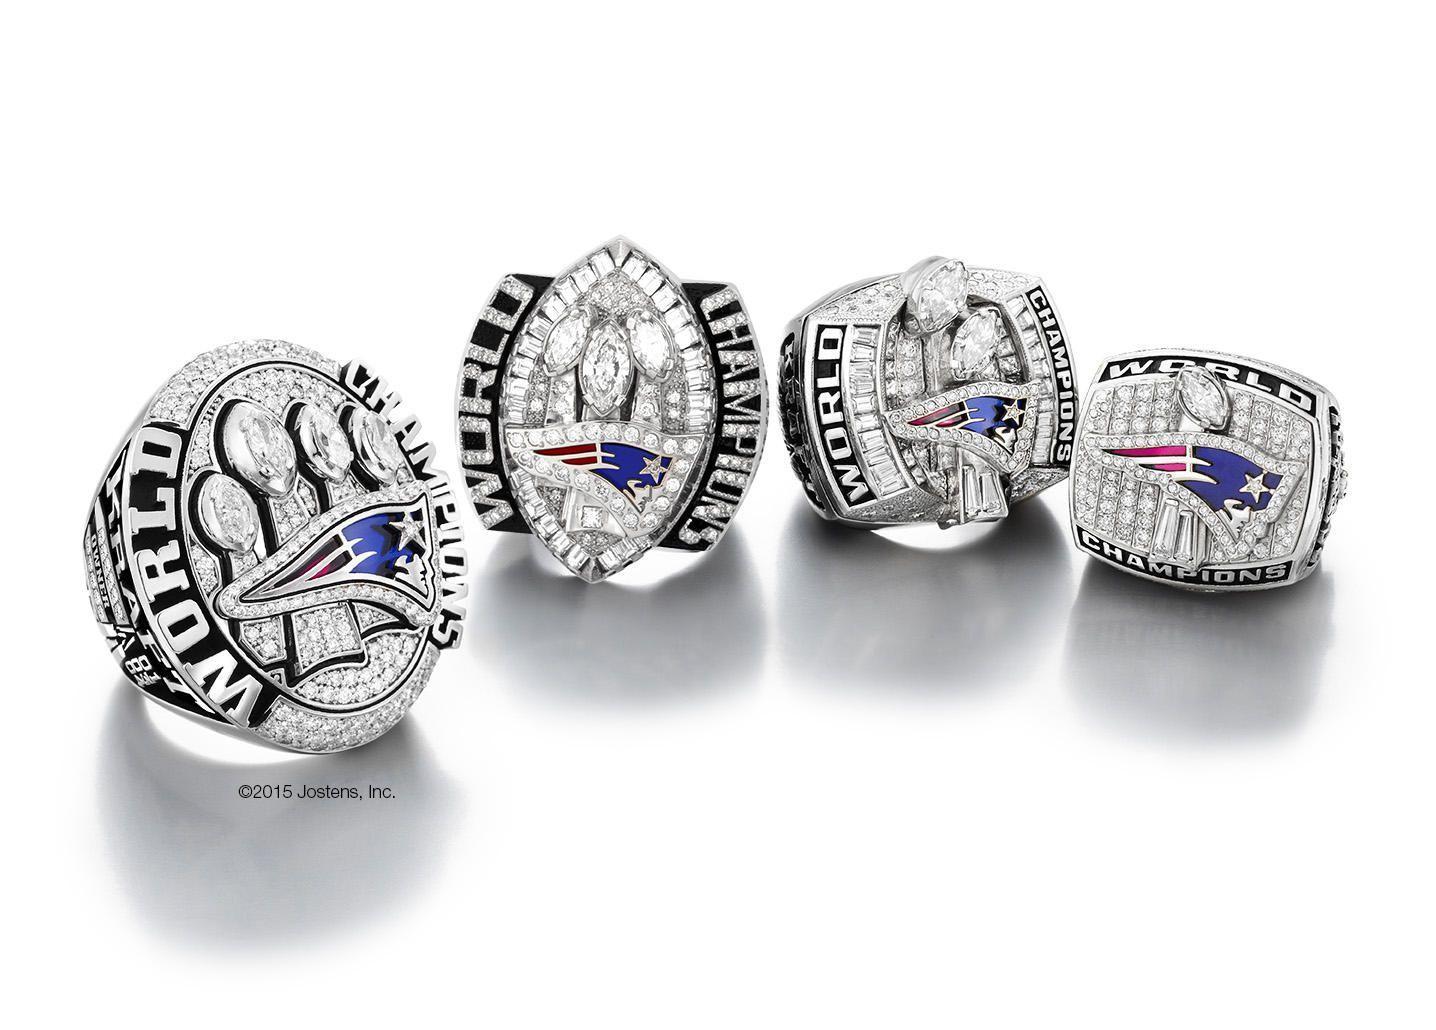 Best Ideas about Championship Rings. Super bowl